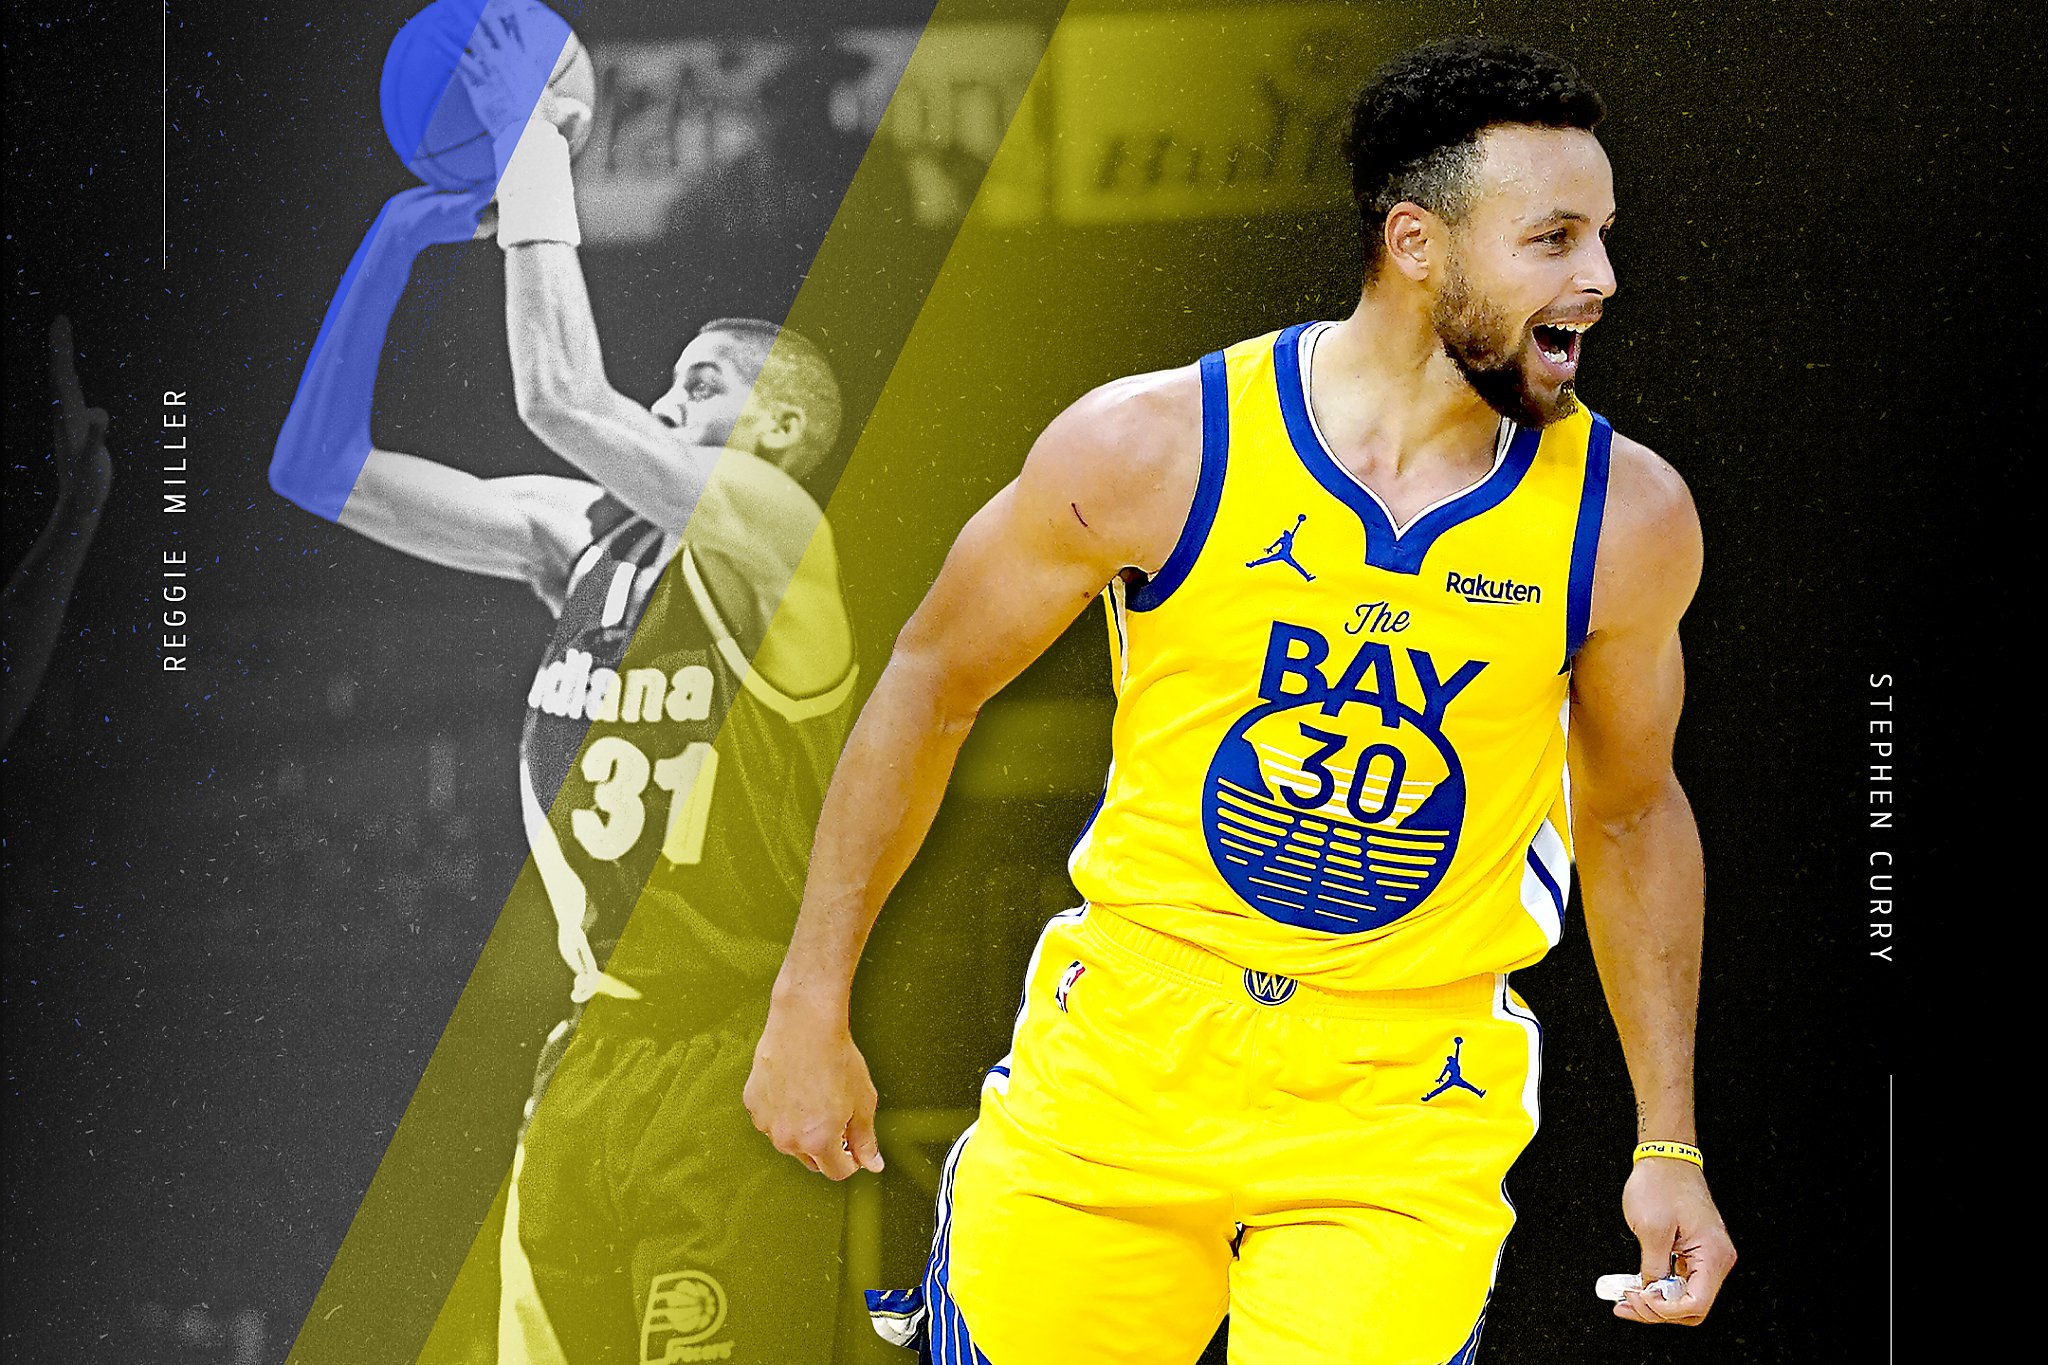 NBA Twitter reacts to Steph Curry becoming NBA's new 3-point leader